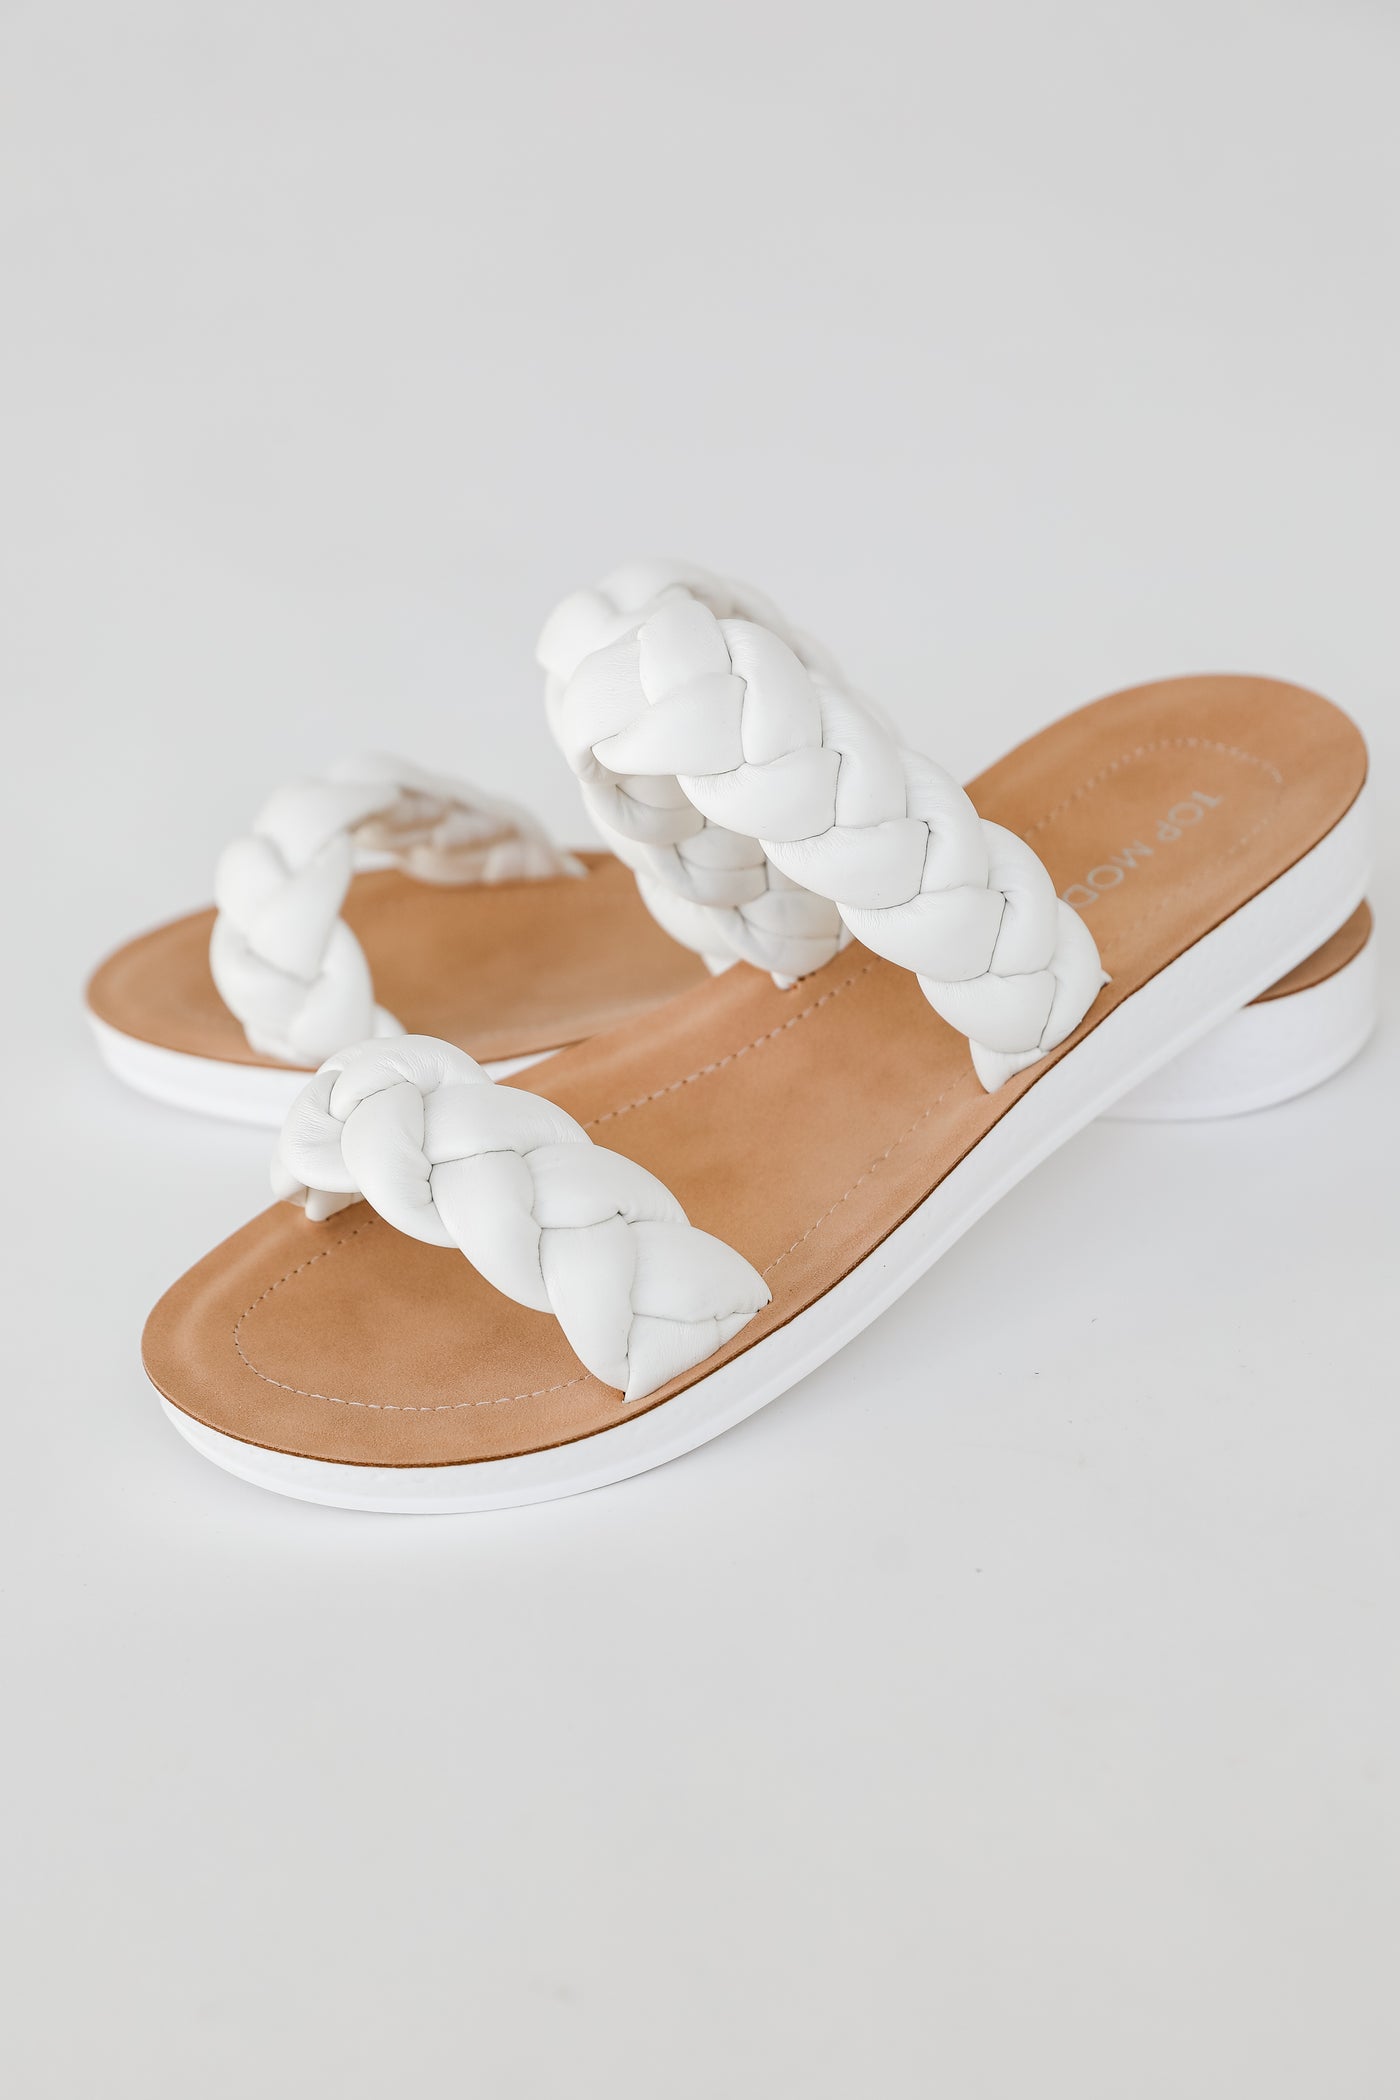 Braided Double Strap Sandals in white flat lay